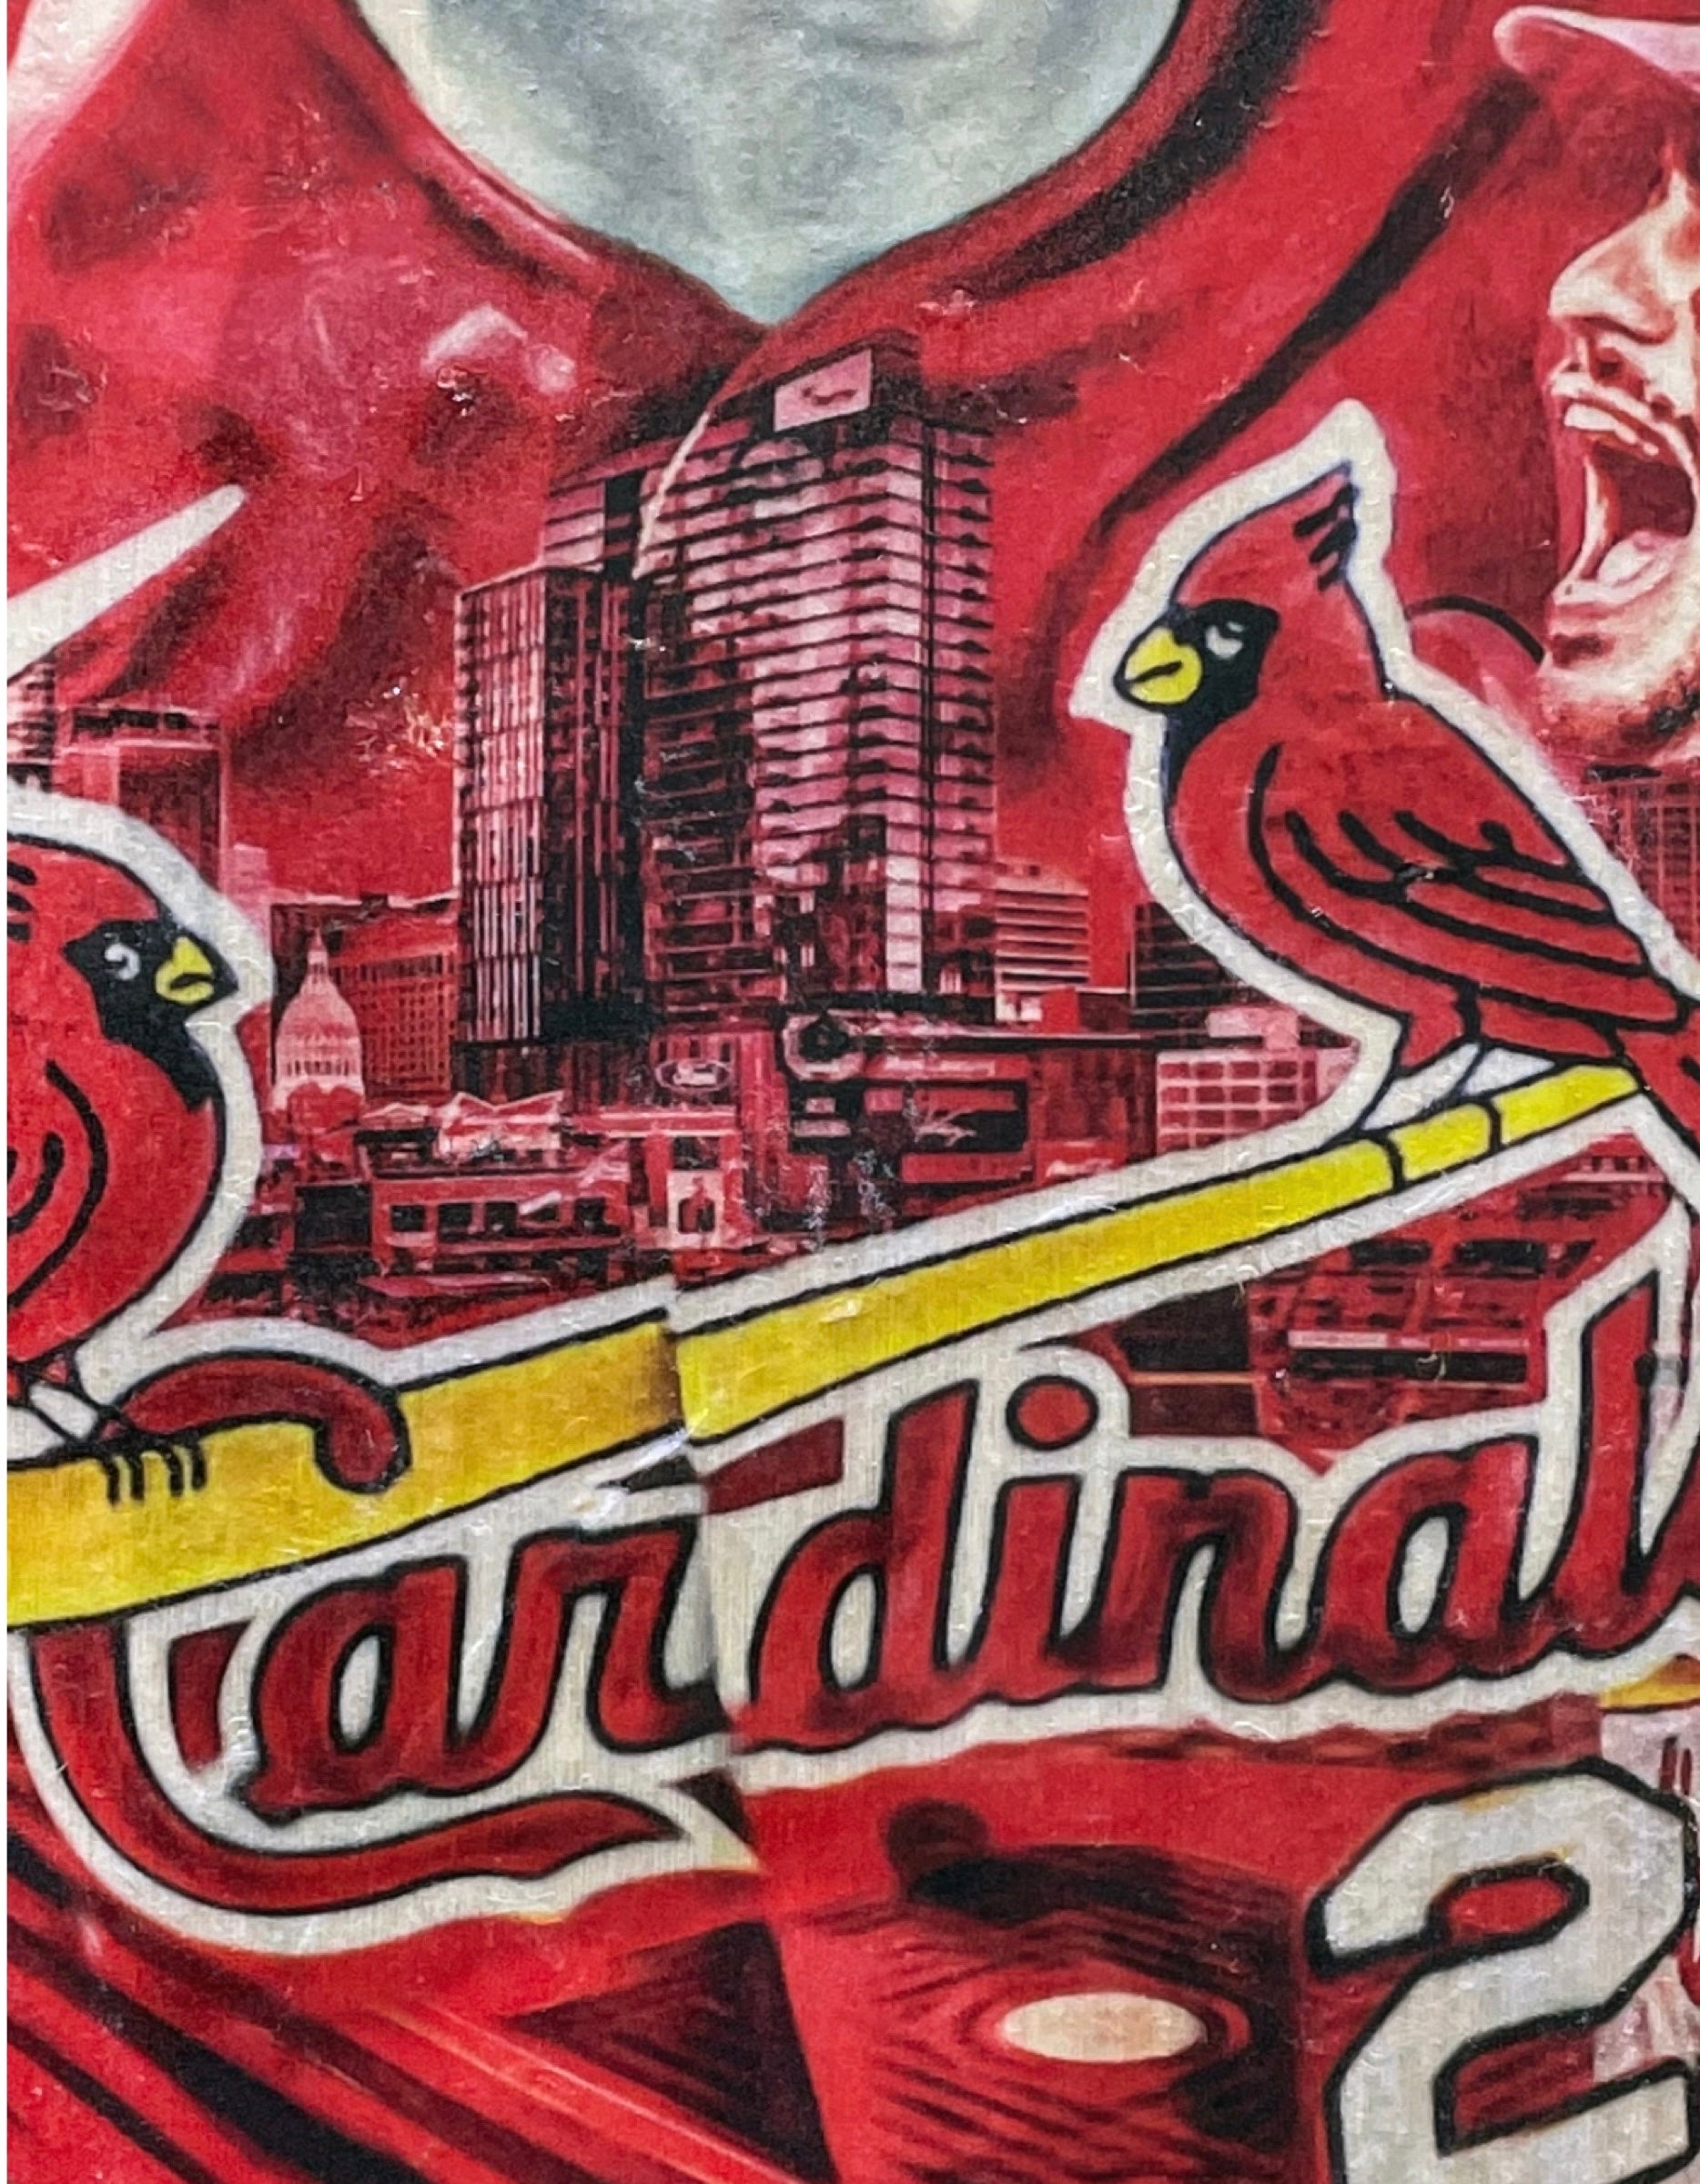 CardinalsCare on X: Today's Cardinals Care Auction is now open! Bid now on  memorabilia autographed by your favorite @Cardinals including this cap,  signed by Nolan Arenado!   /  X